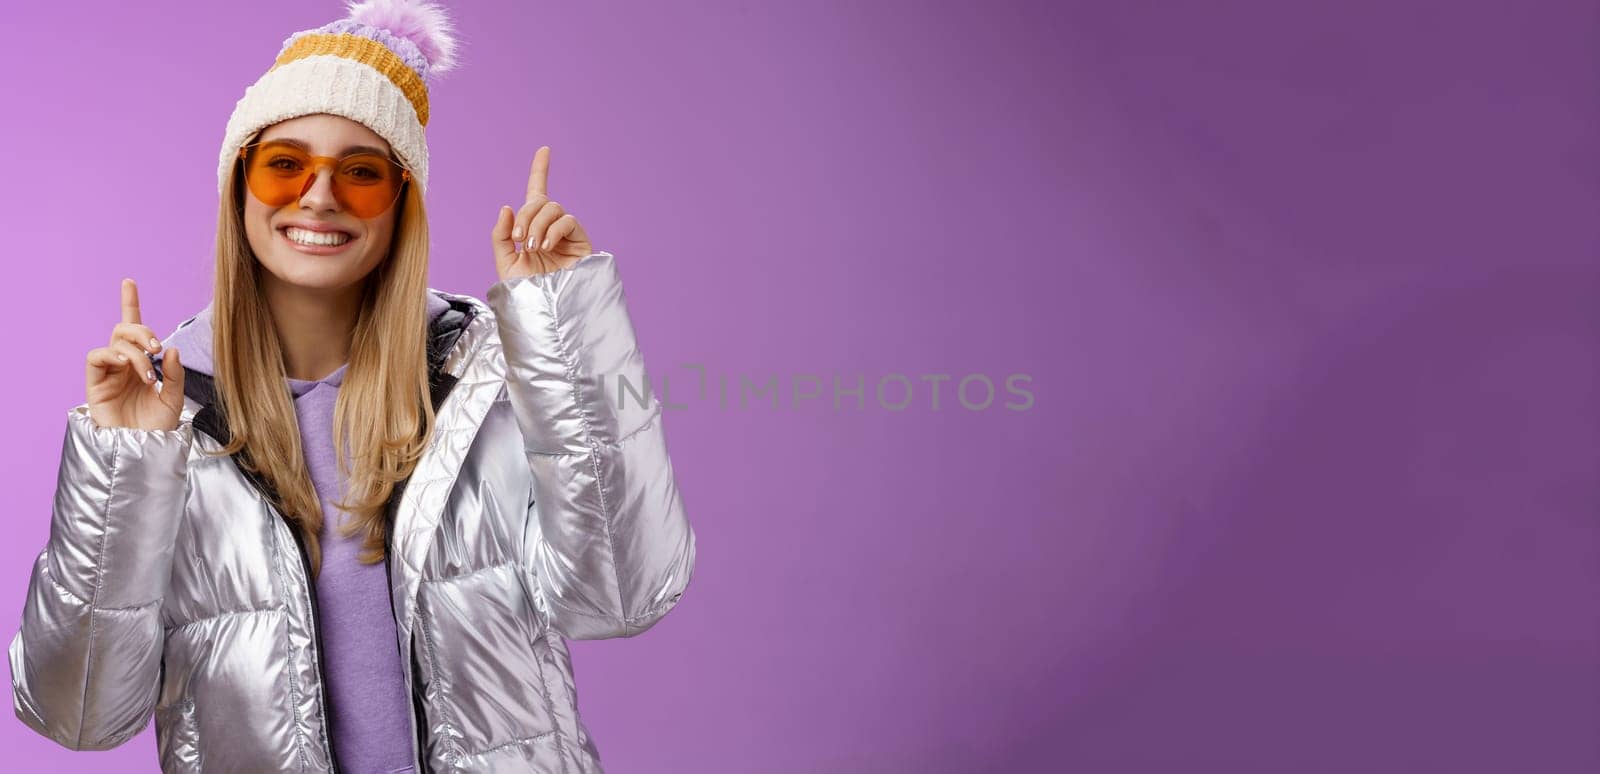 Joyful energized entertained cute blond woman having fun enjoy vacation snowy mountain trip wearing sunglasses silver jacket winter hat dancing pointing up amused standing purple background by Benzoix